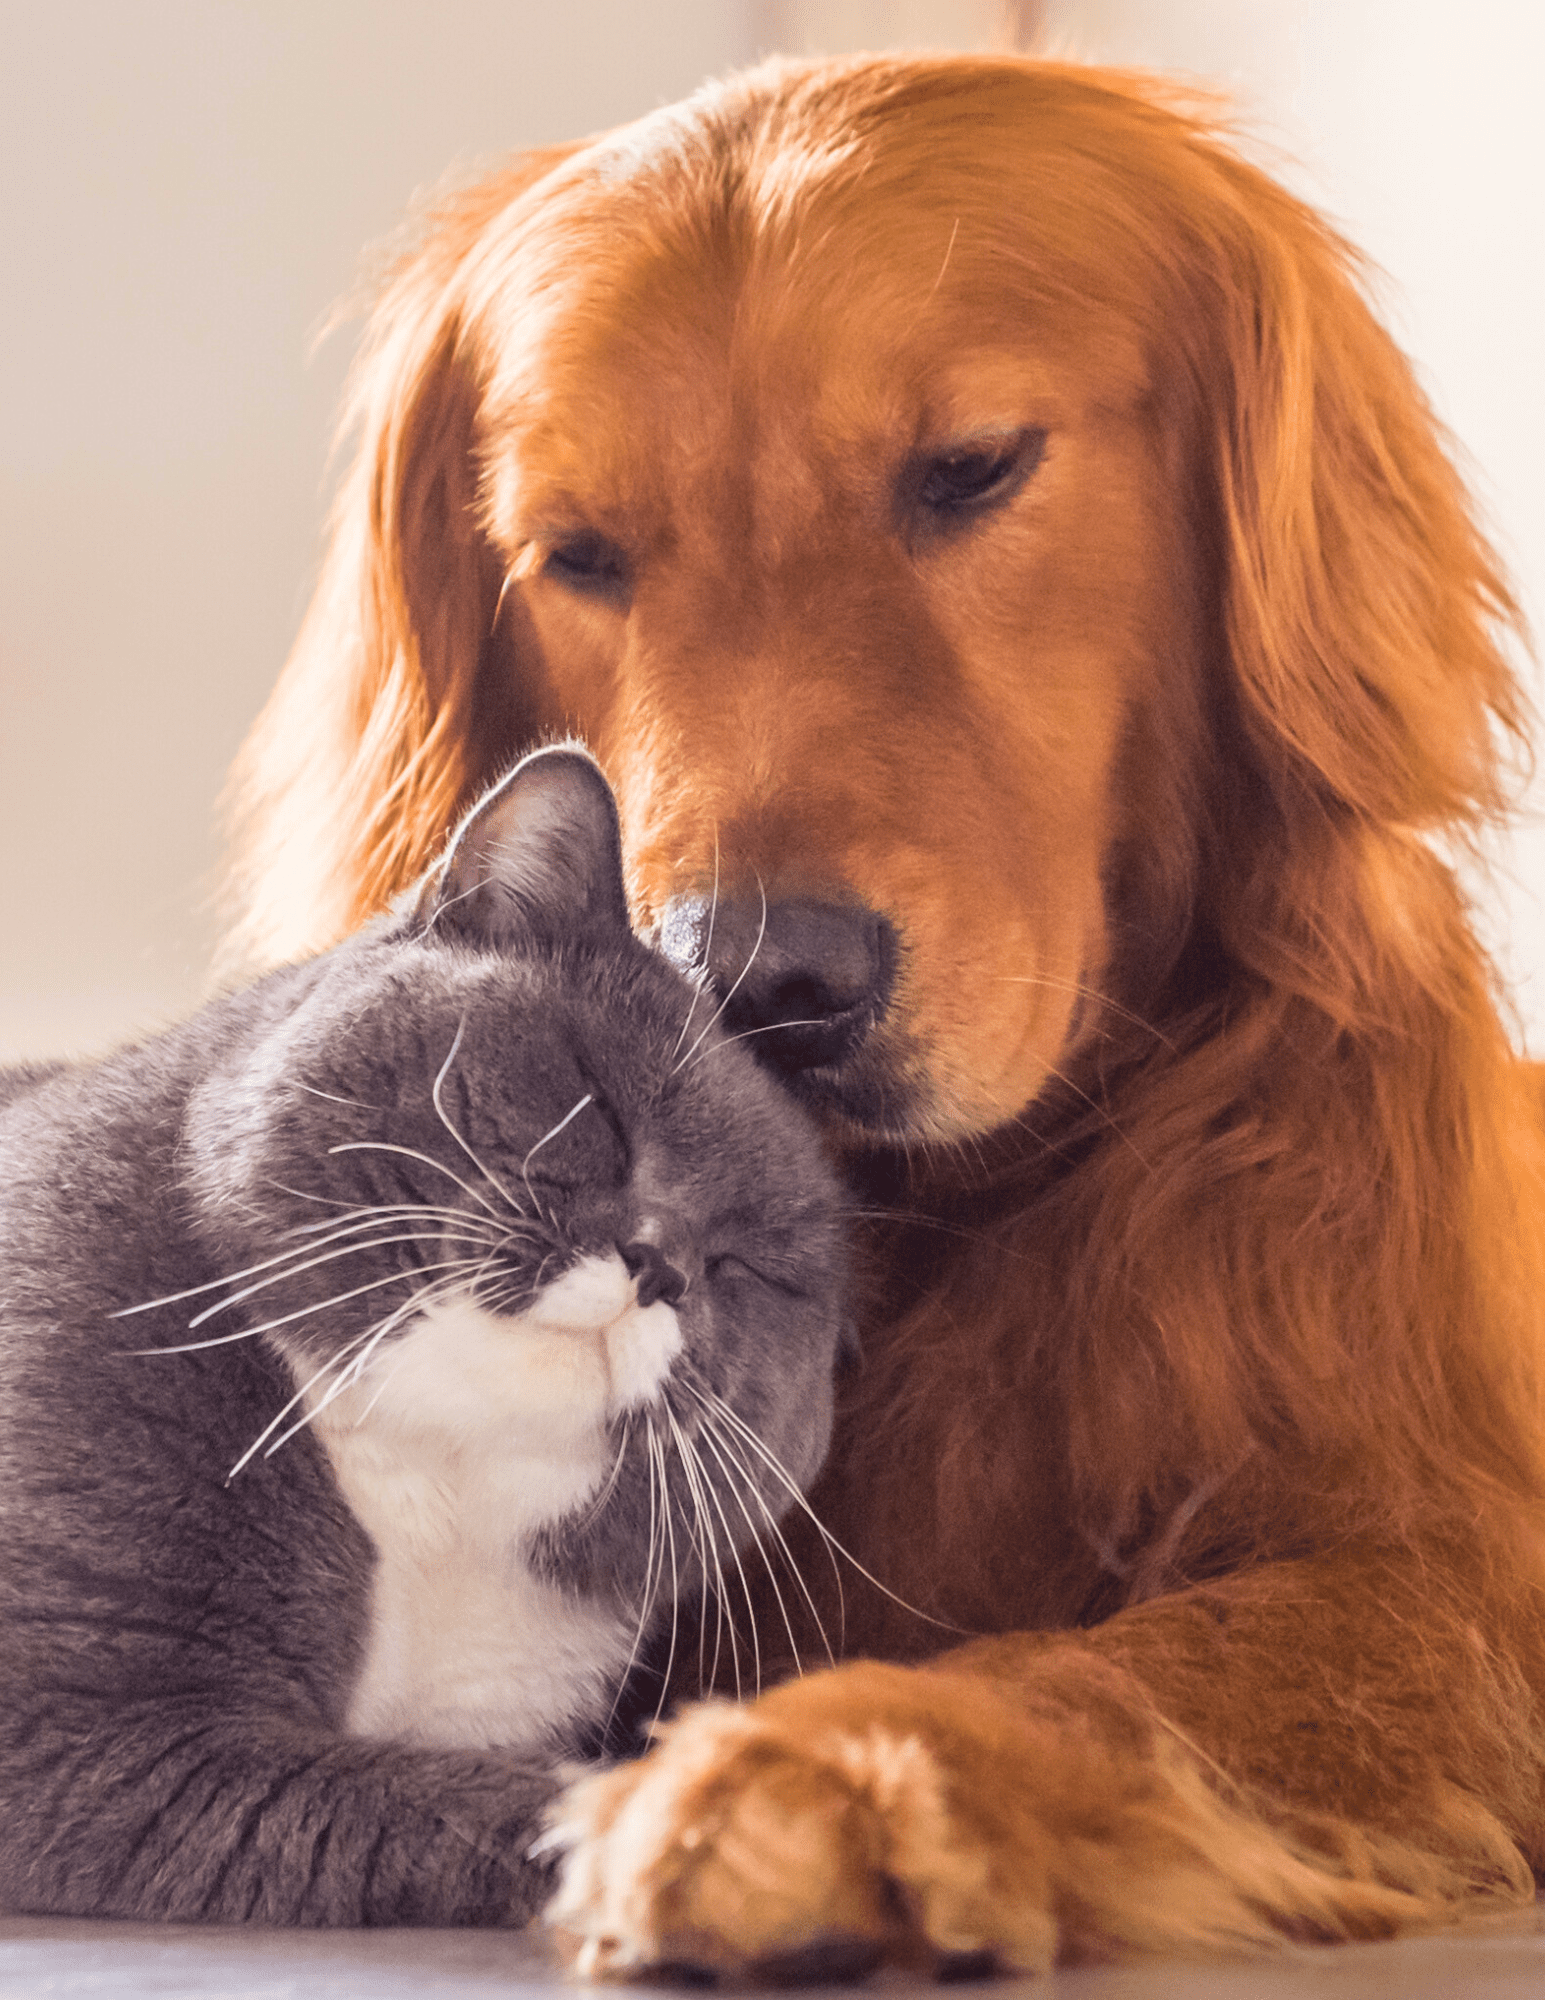 dog and cat hugging